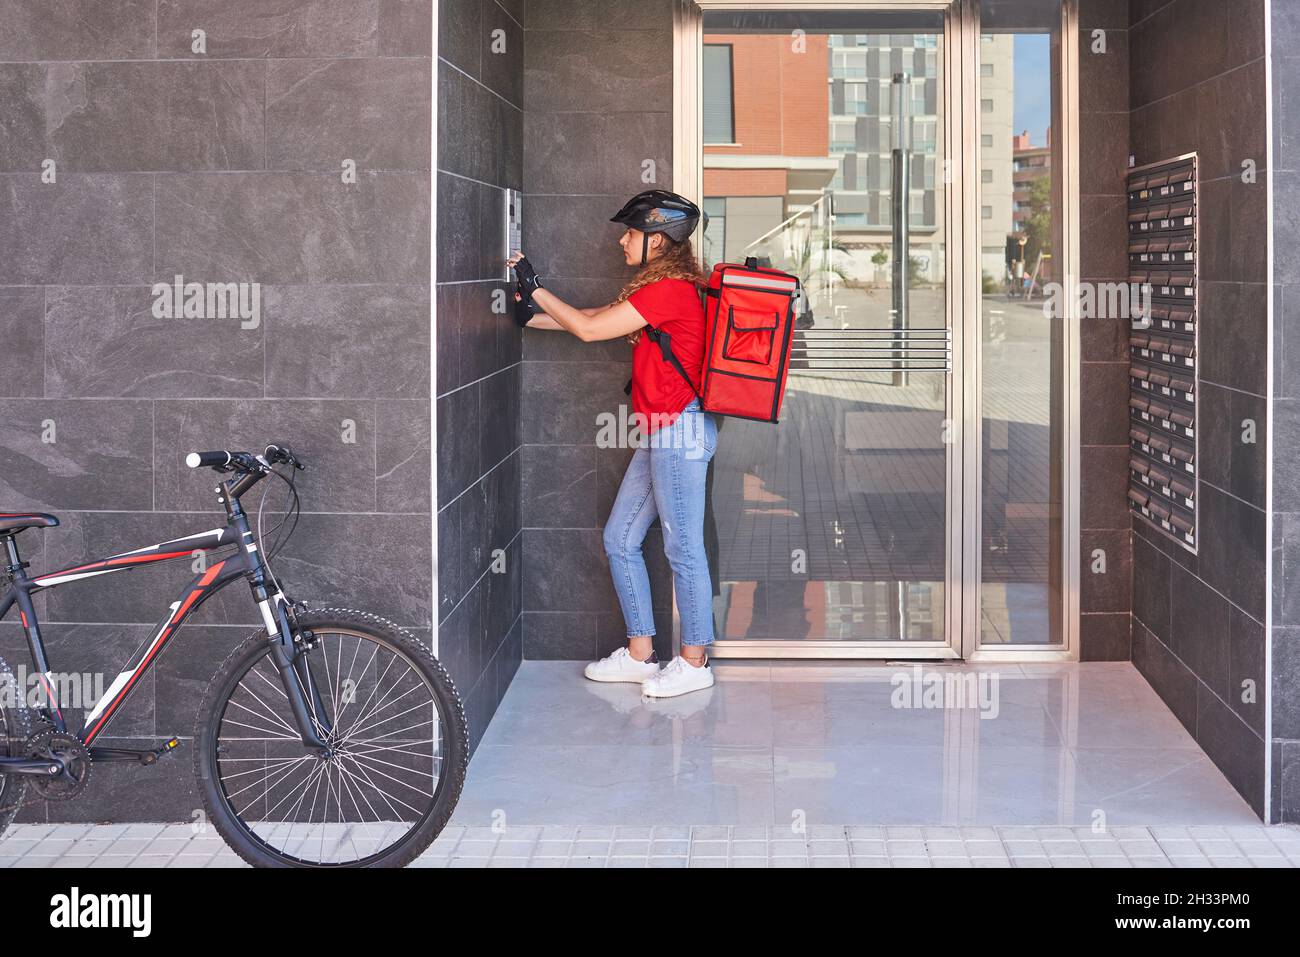 A cyclist delivery girl ringing the intercom bell Stock Photo